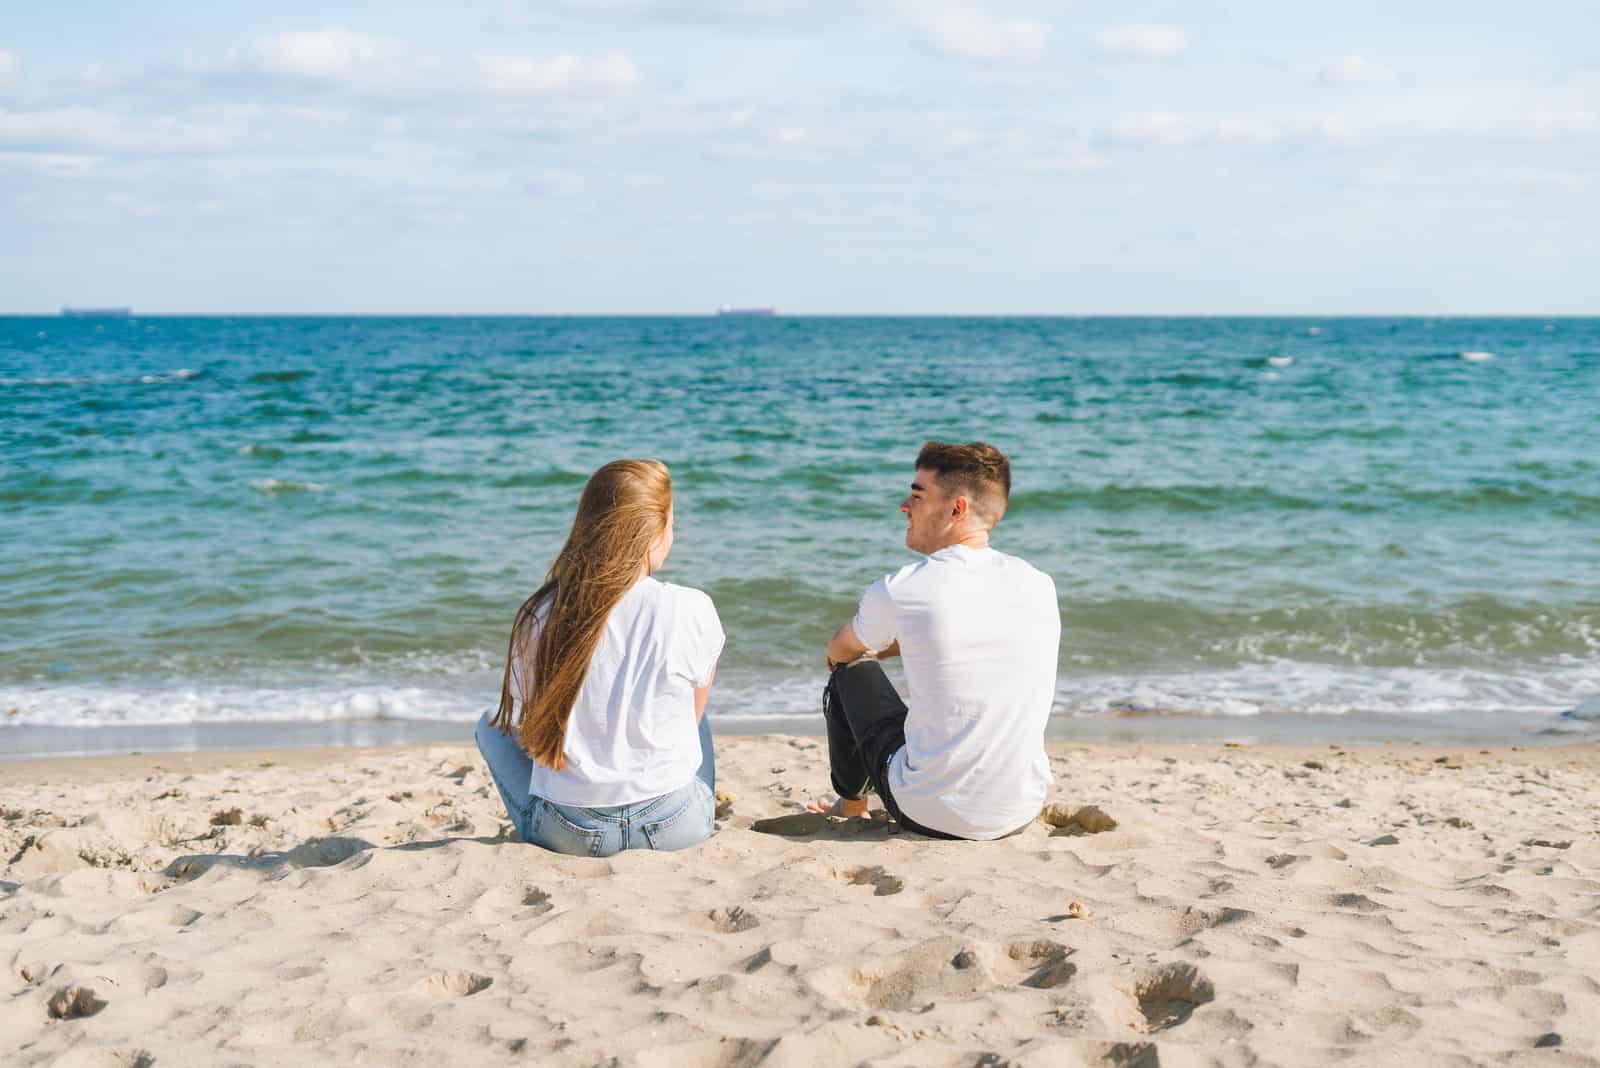 a man and a woman sit on the beach and talk